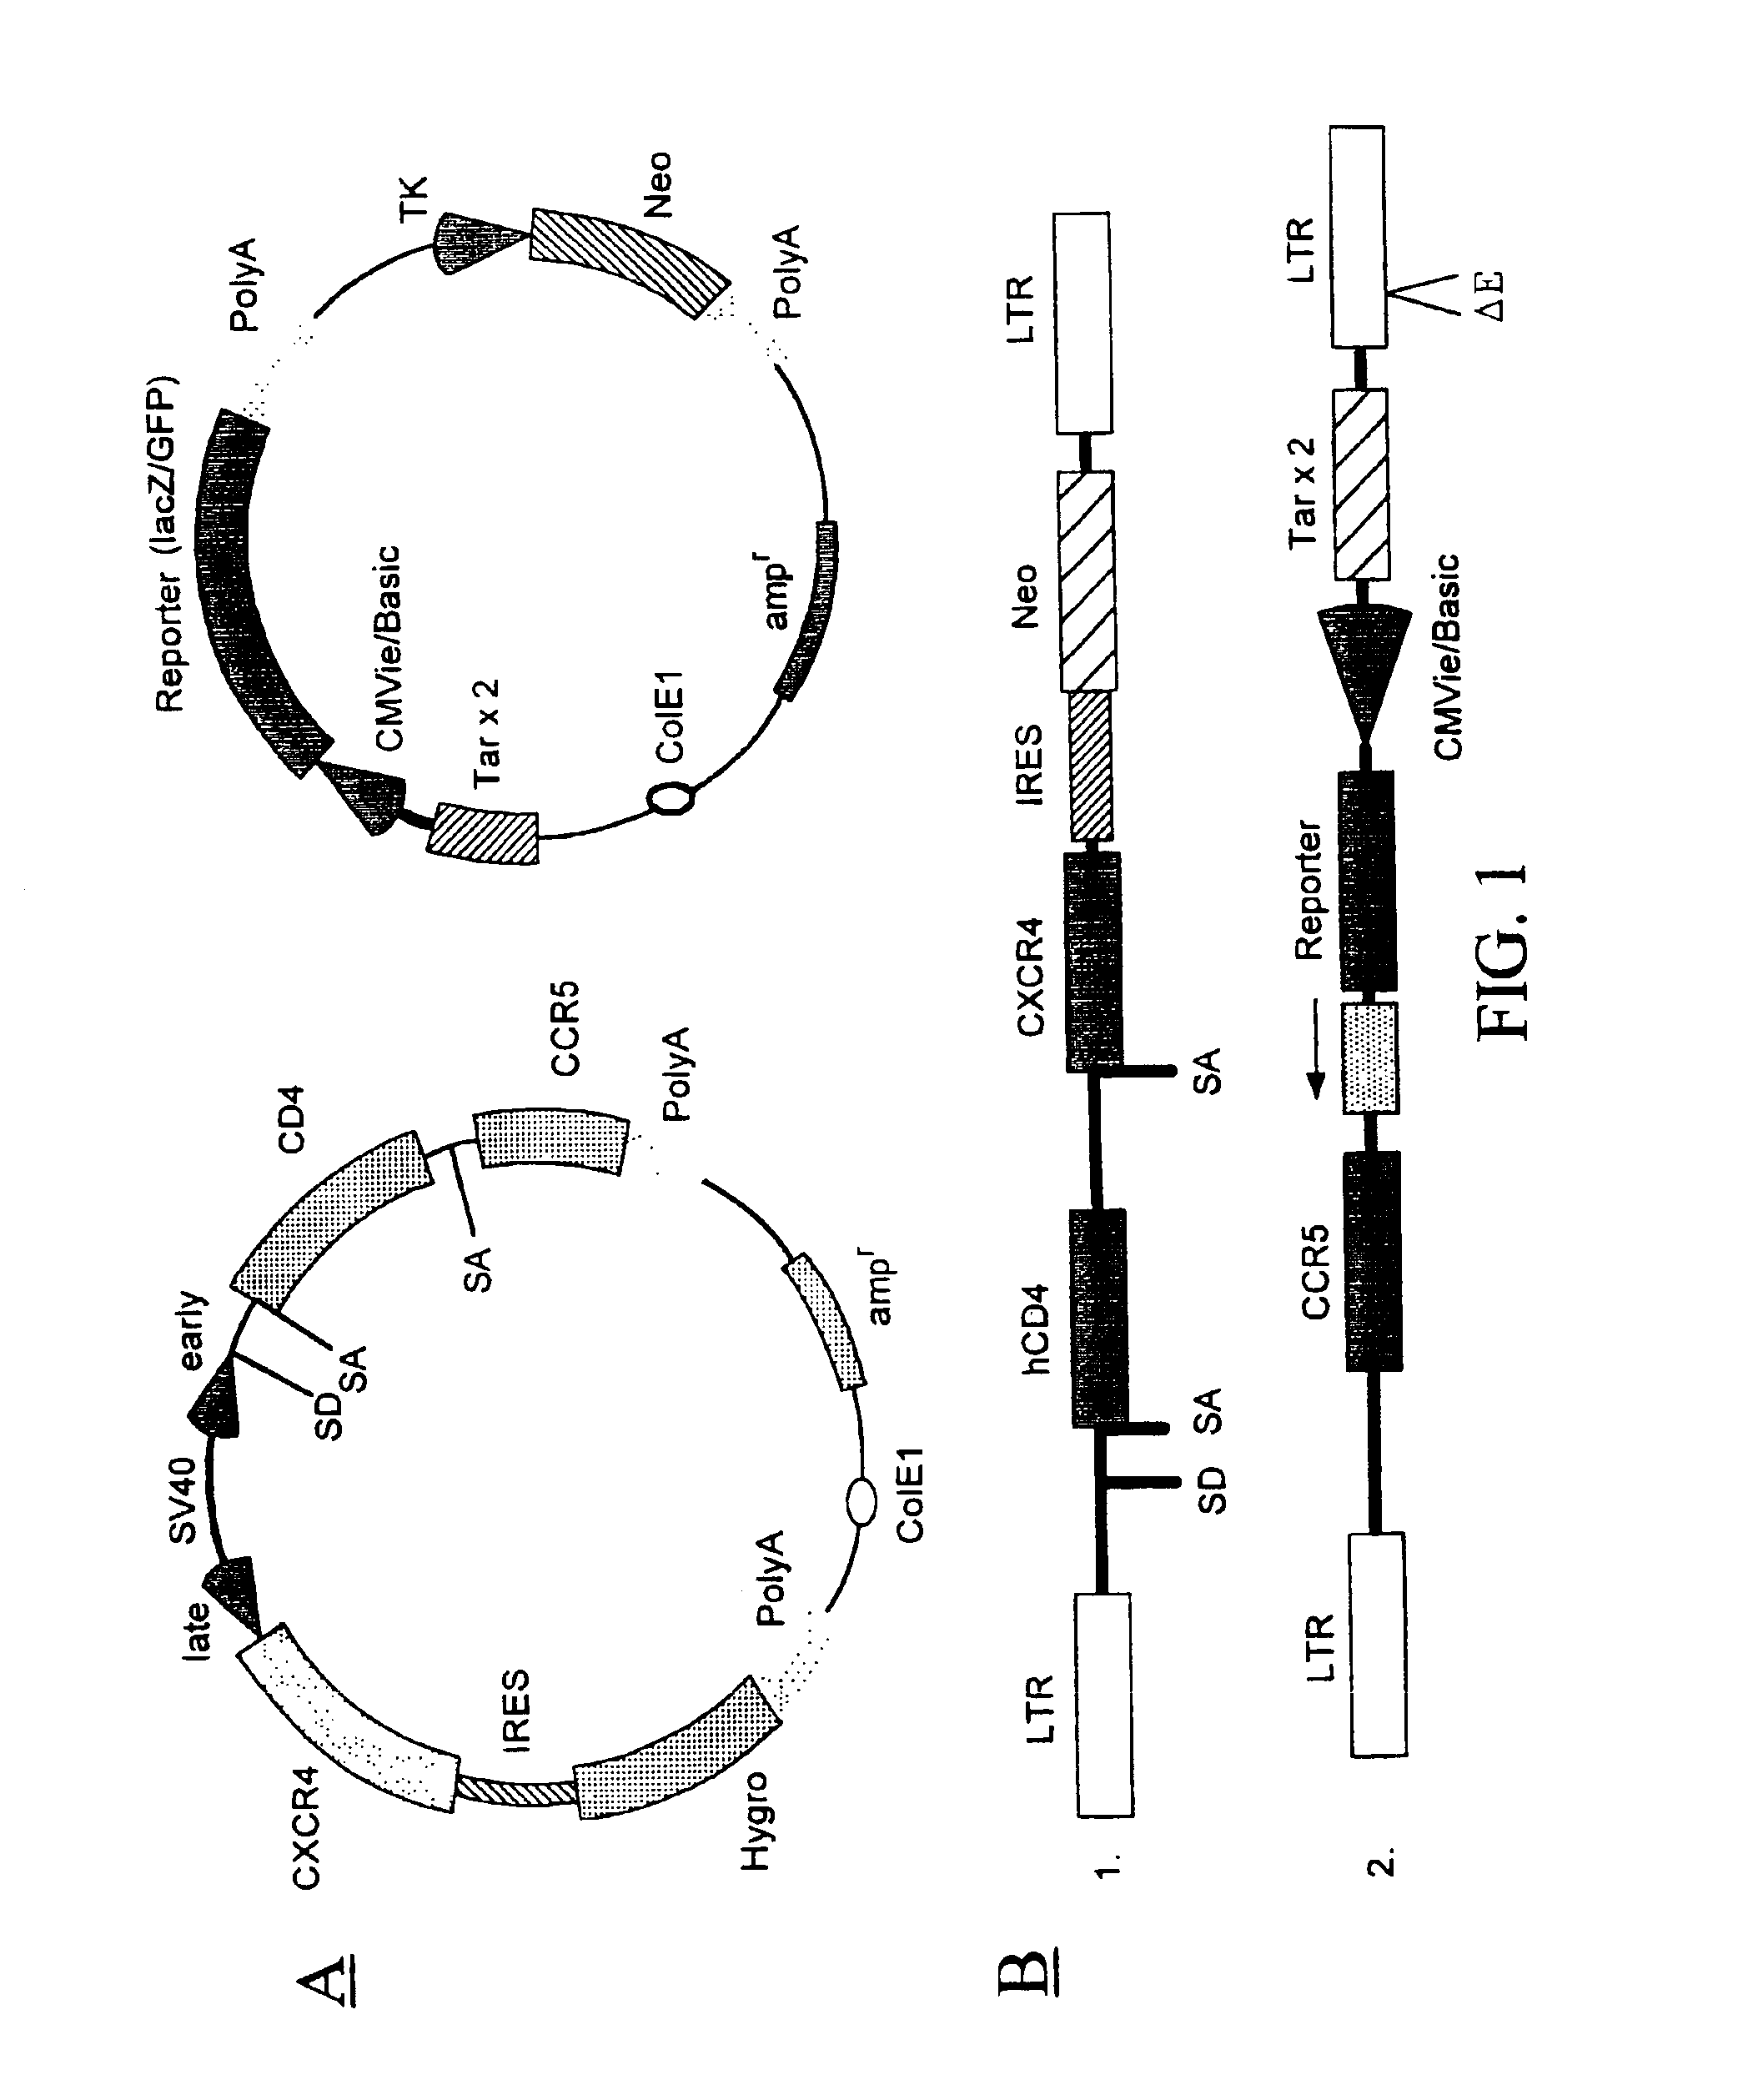 Compositions and methods for detecting human immunodeficiency virus